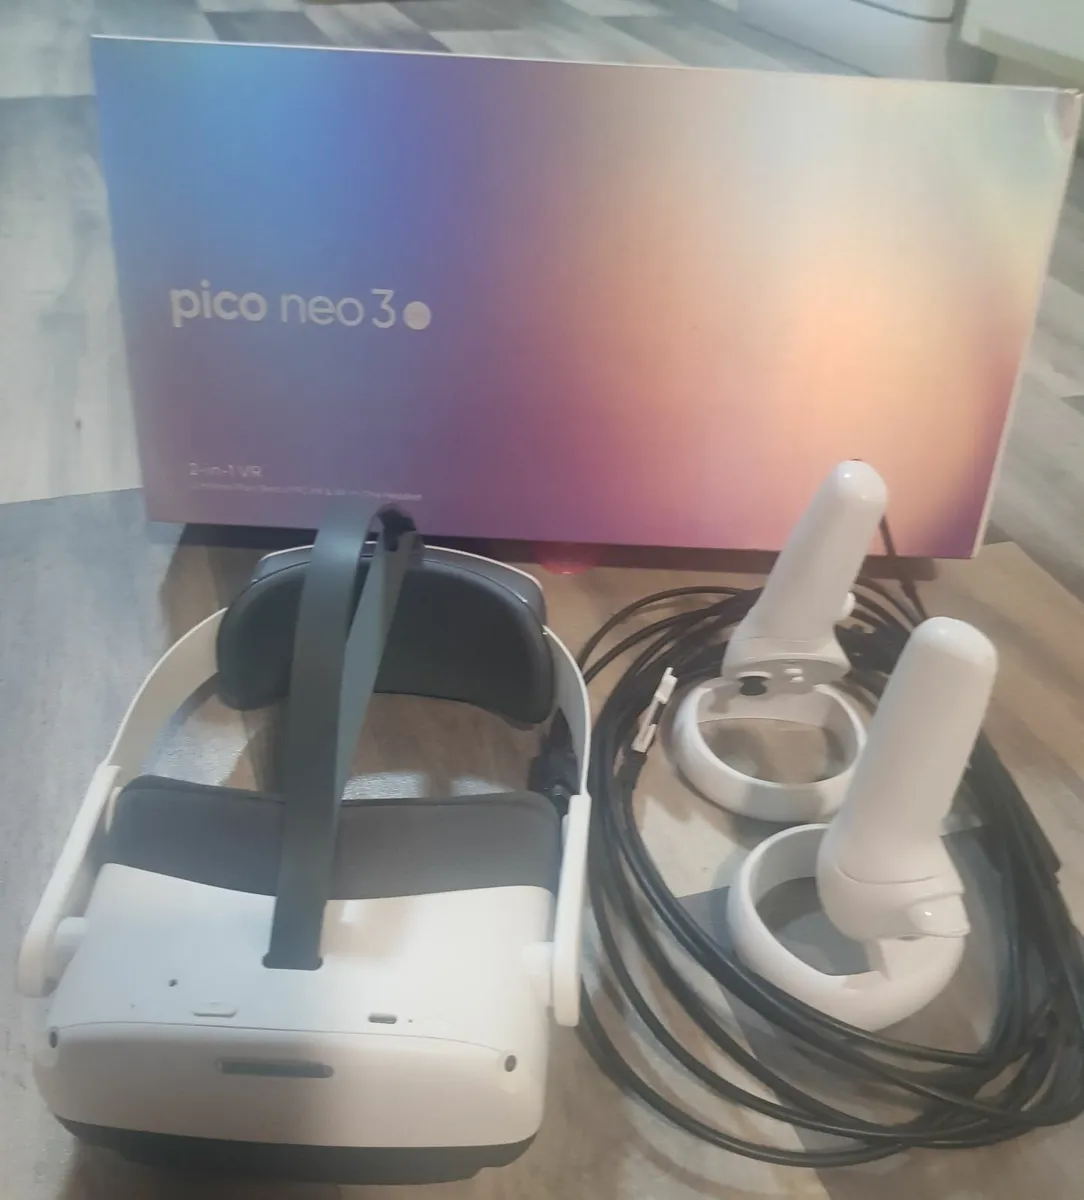 Pico Neo 3 link VR stand alone Headset 256MB - Image 1